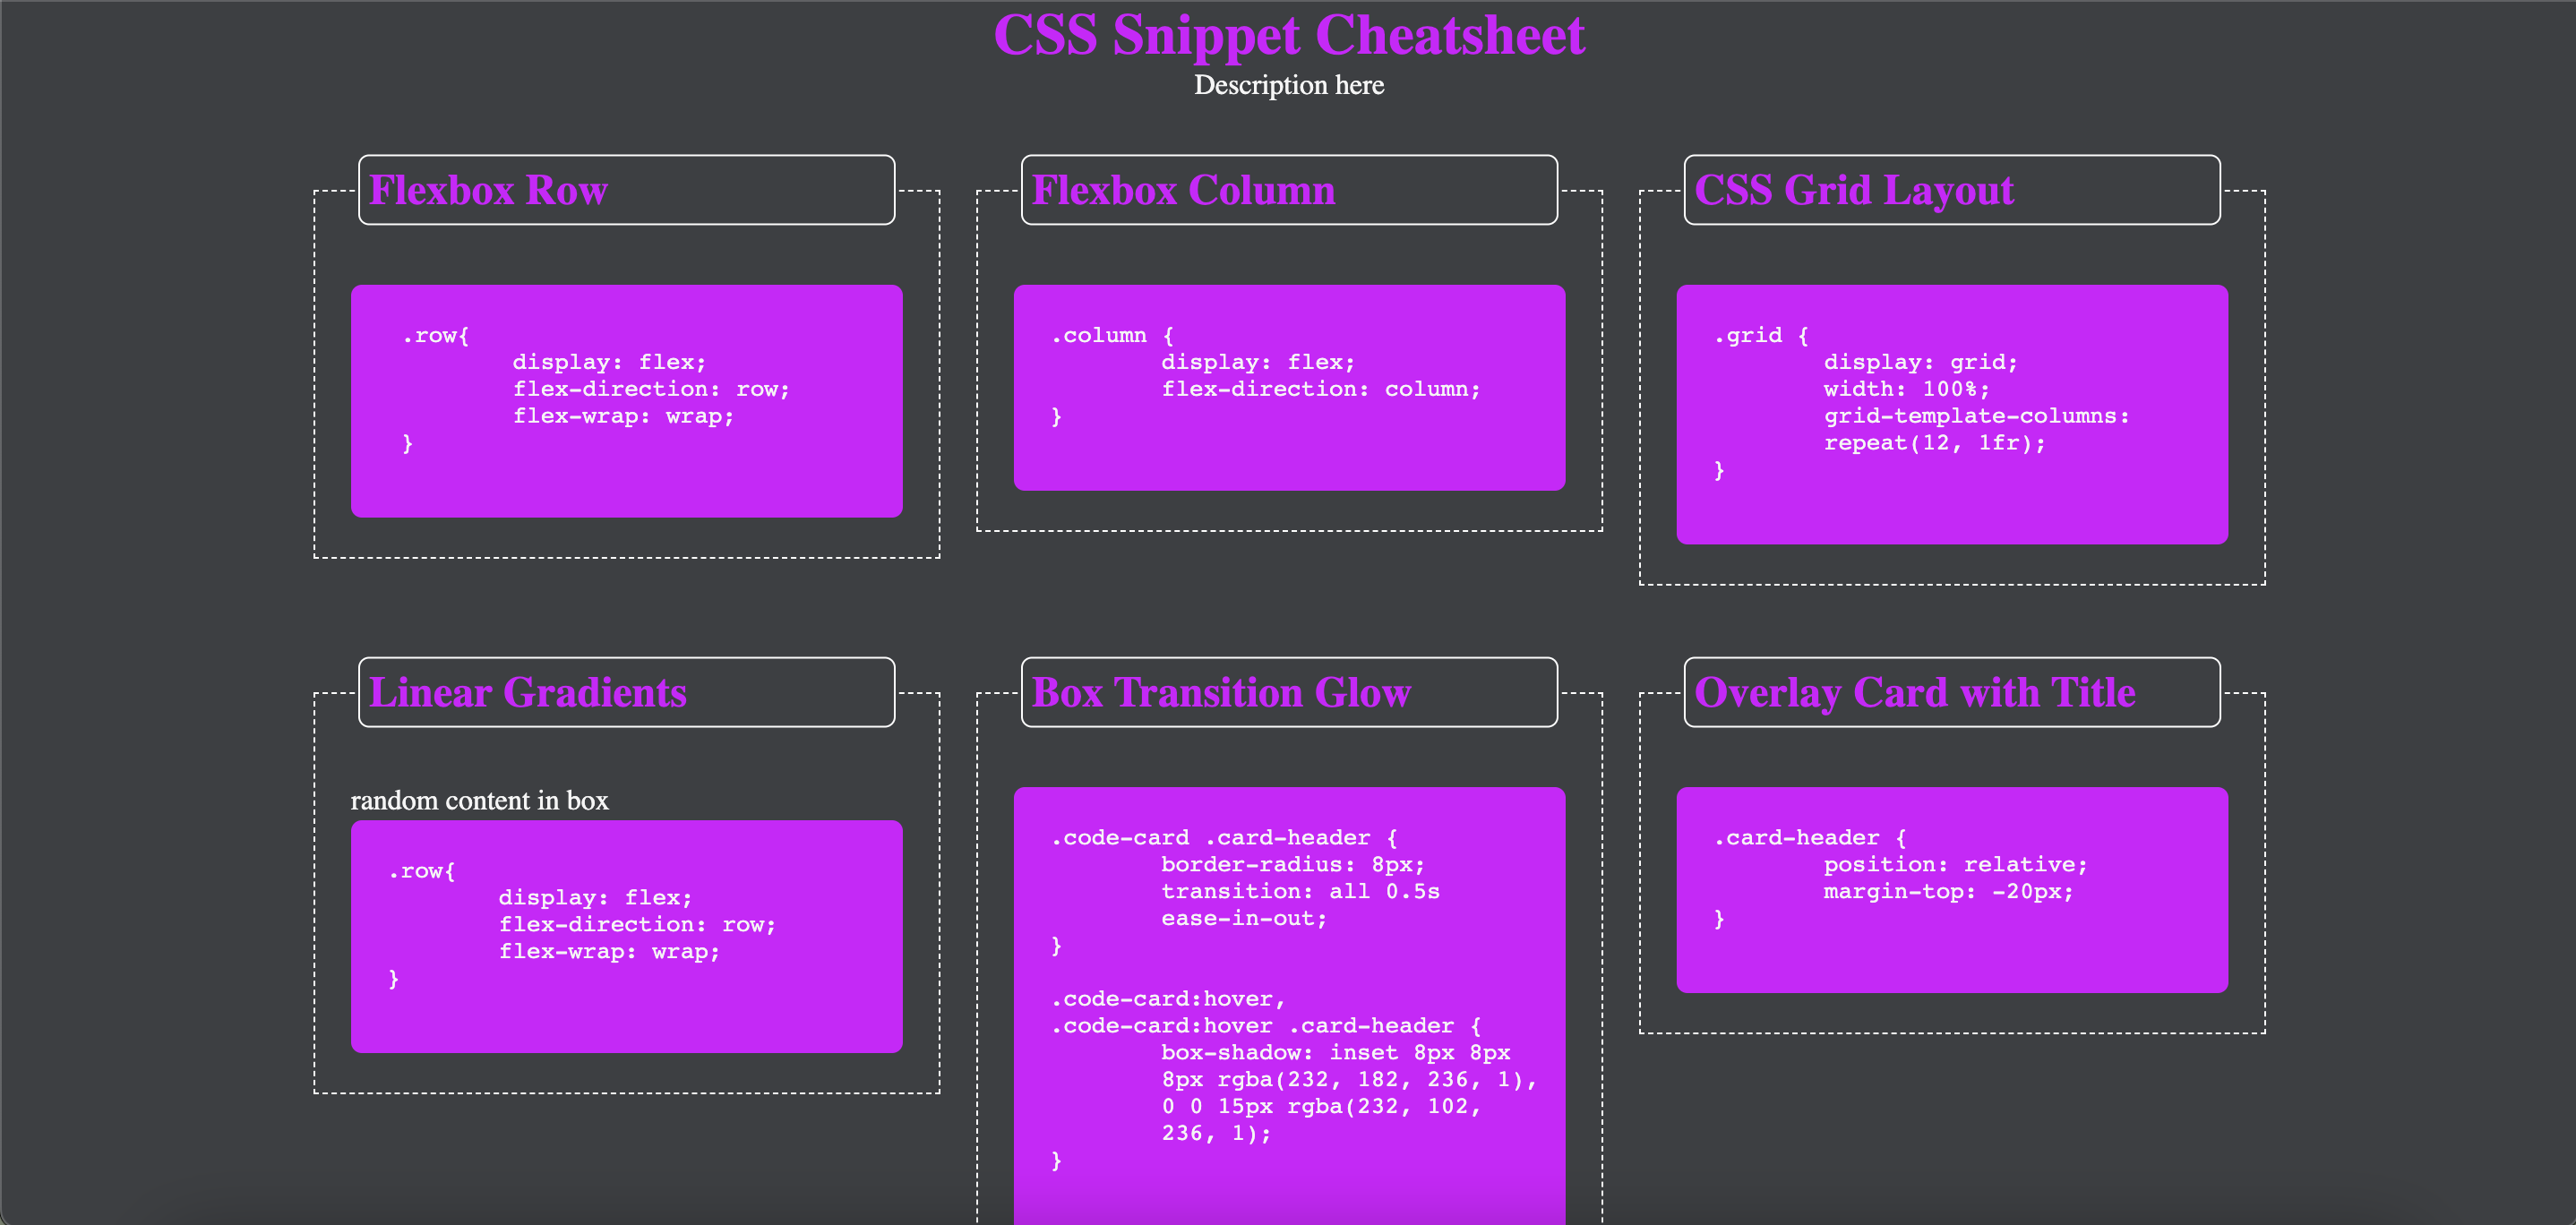 The spotlight project in the portfolio. The image shows a cheat-sheet website for CSS snippets.